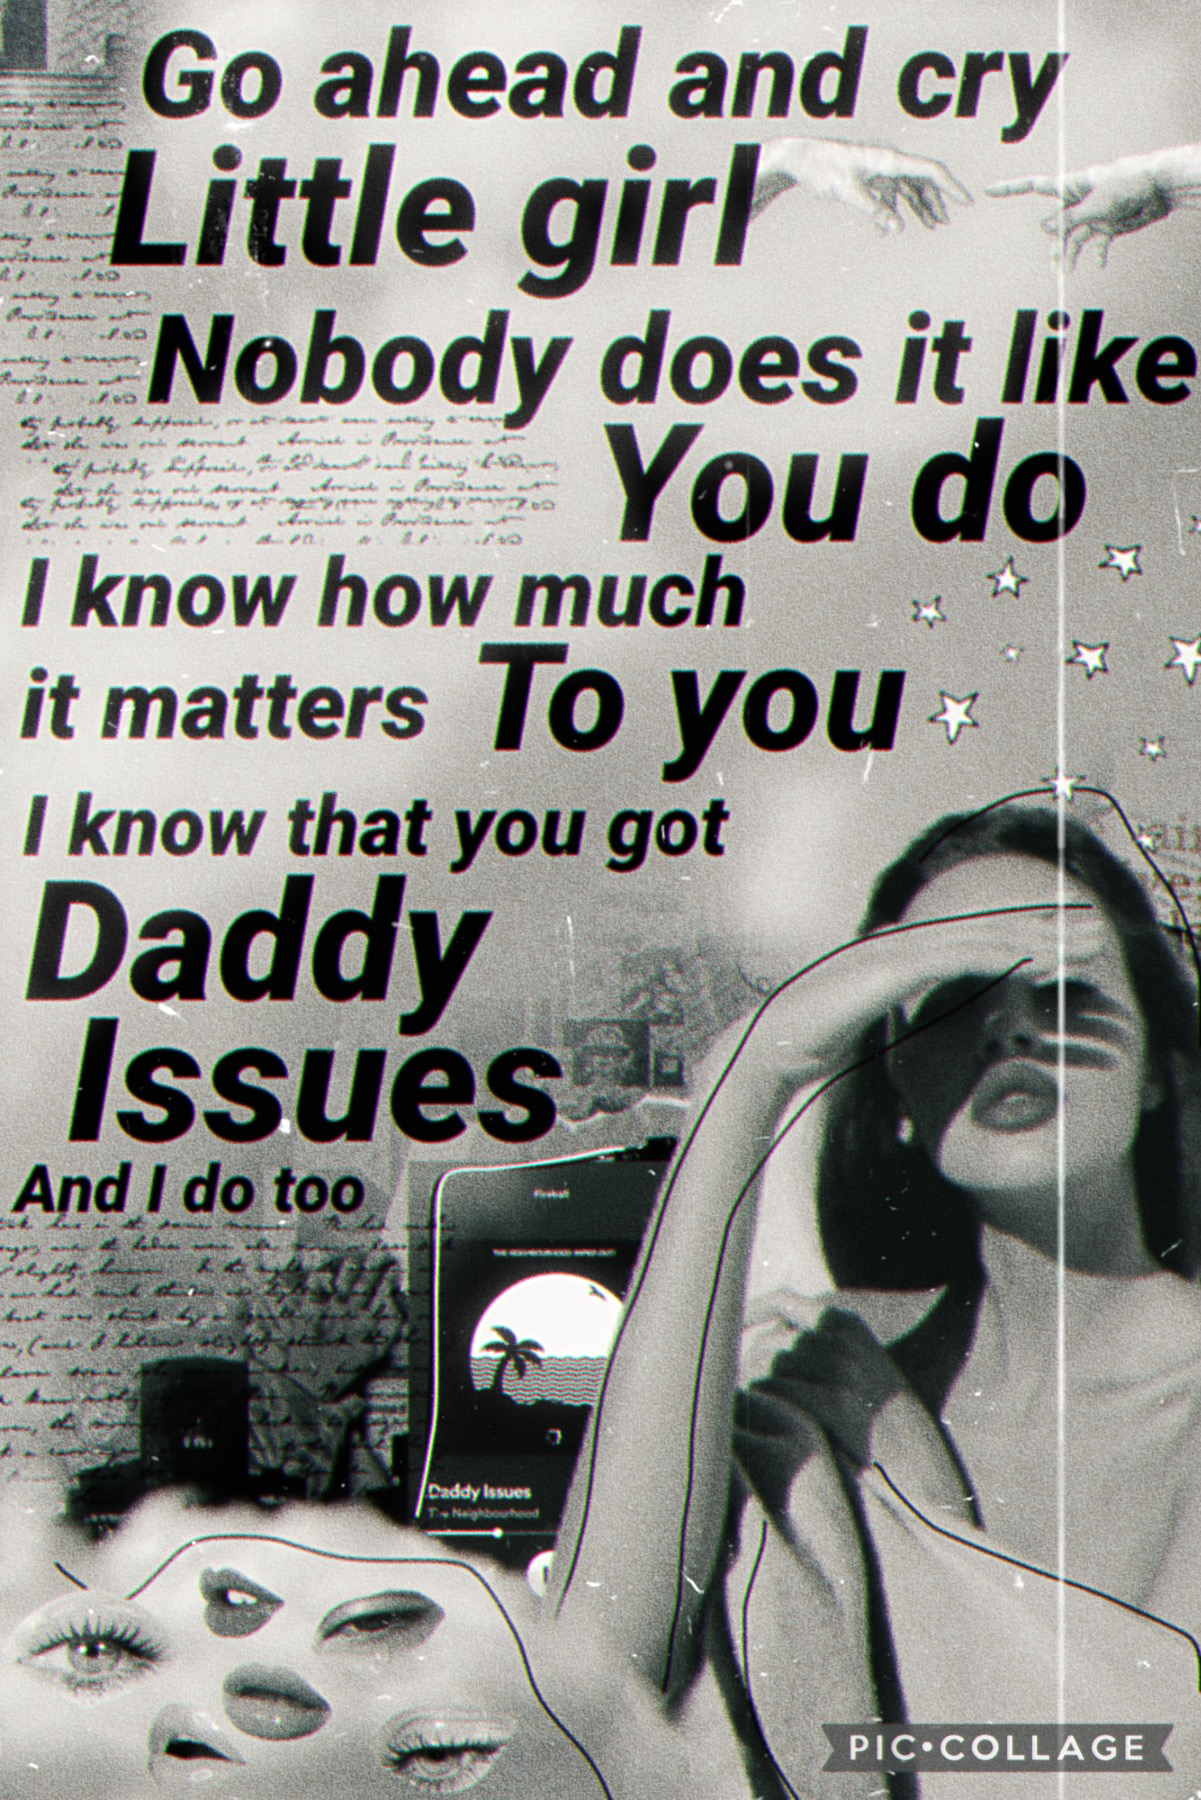 ✨🖤😞🖤✨
🖤Daddy Issues🖤
✨This collage sucks btw, I’m just not as good as what y’all could have done✨
😌Also Daddy Issues is literally 1 on my playlist cuz ITS SO GOOD LOL im obsessed😌
👍um yeah that’s it